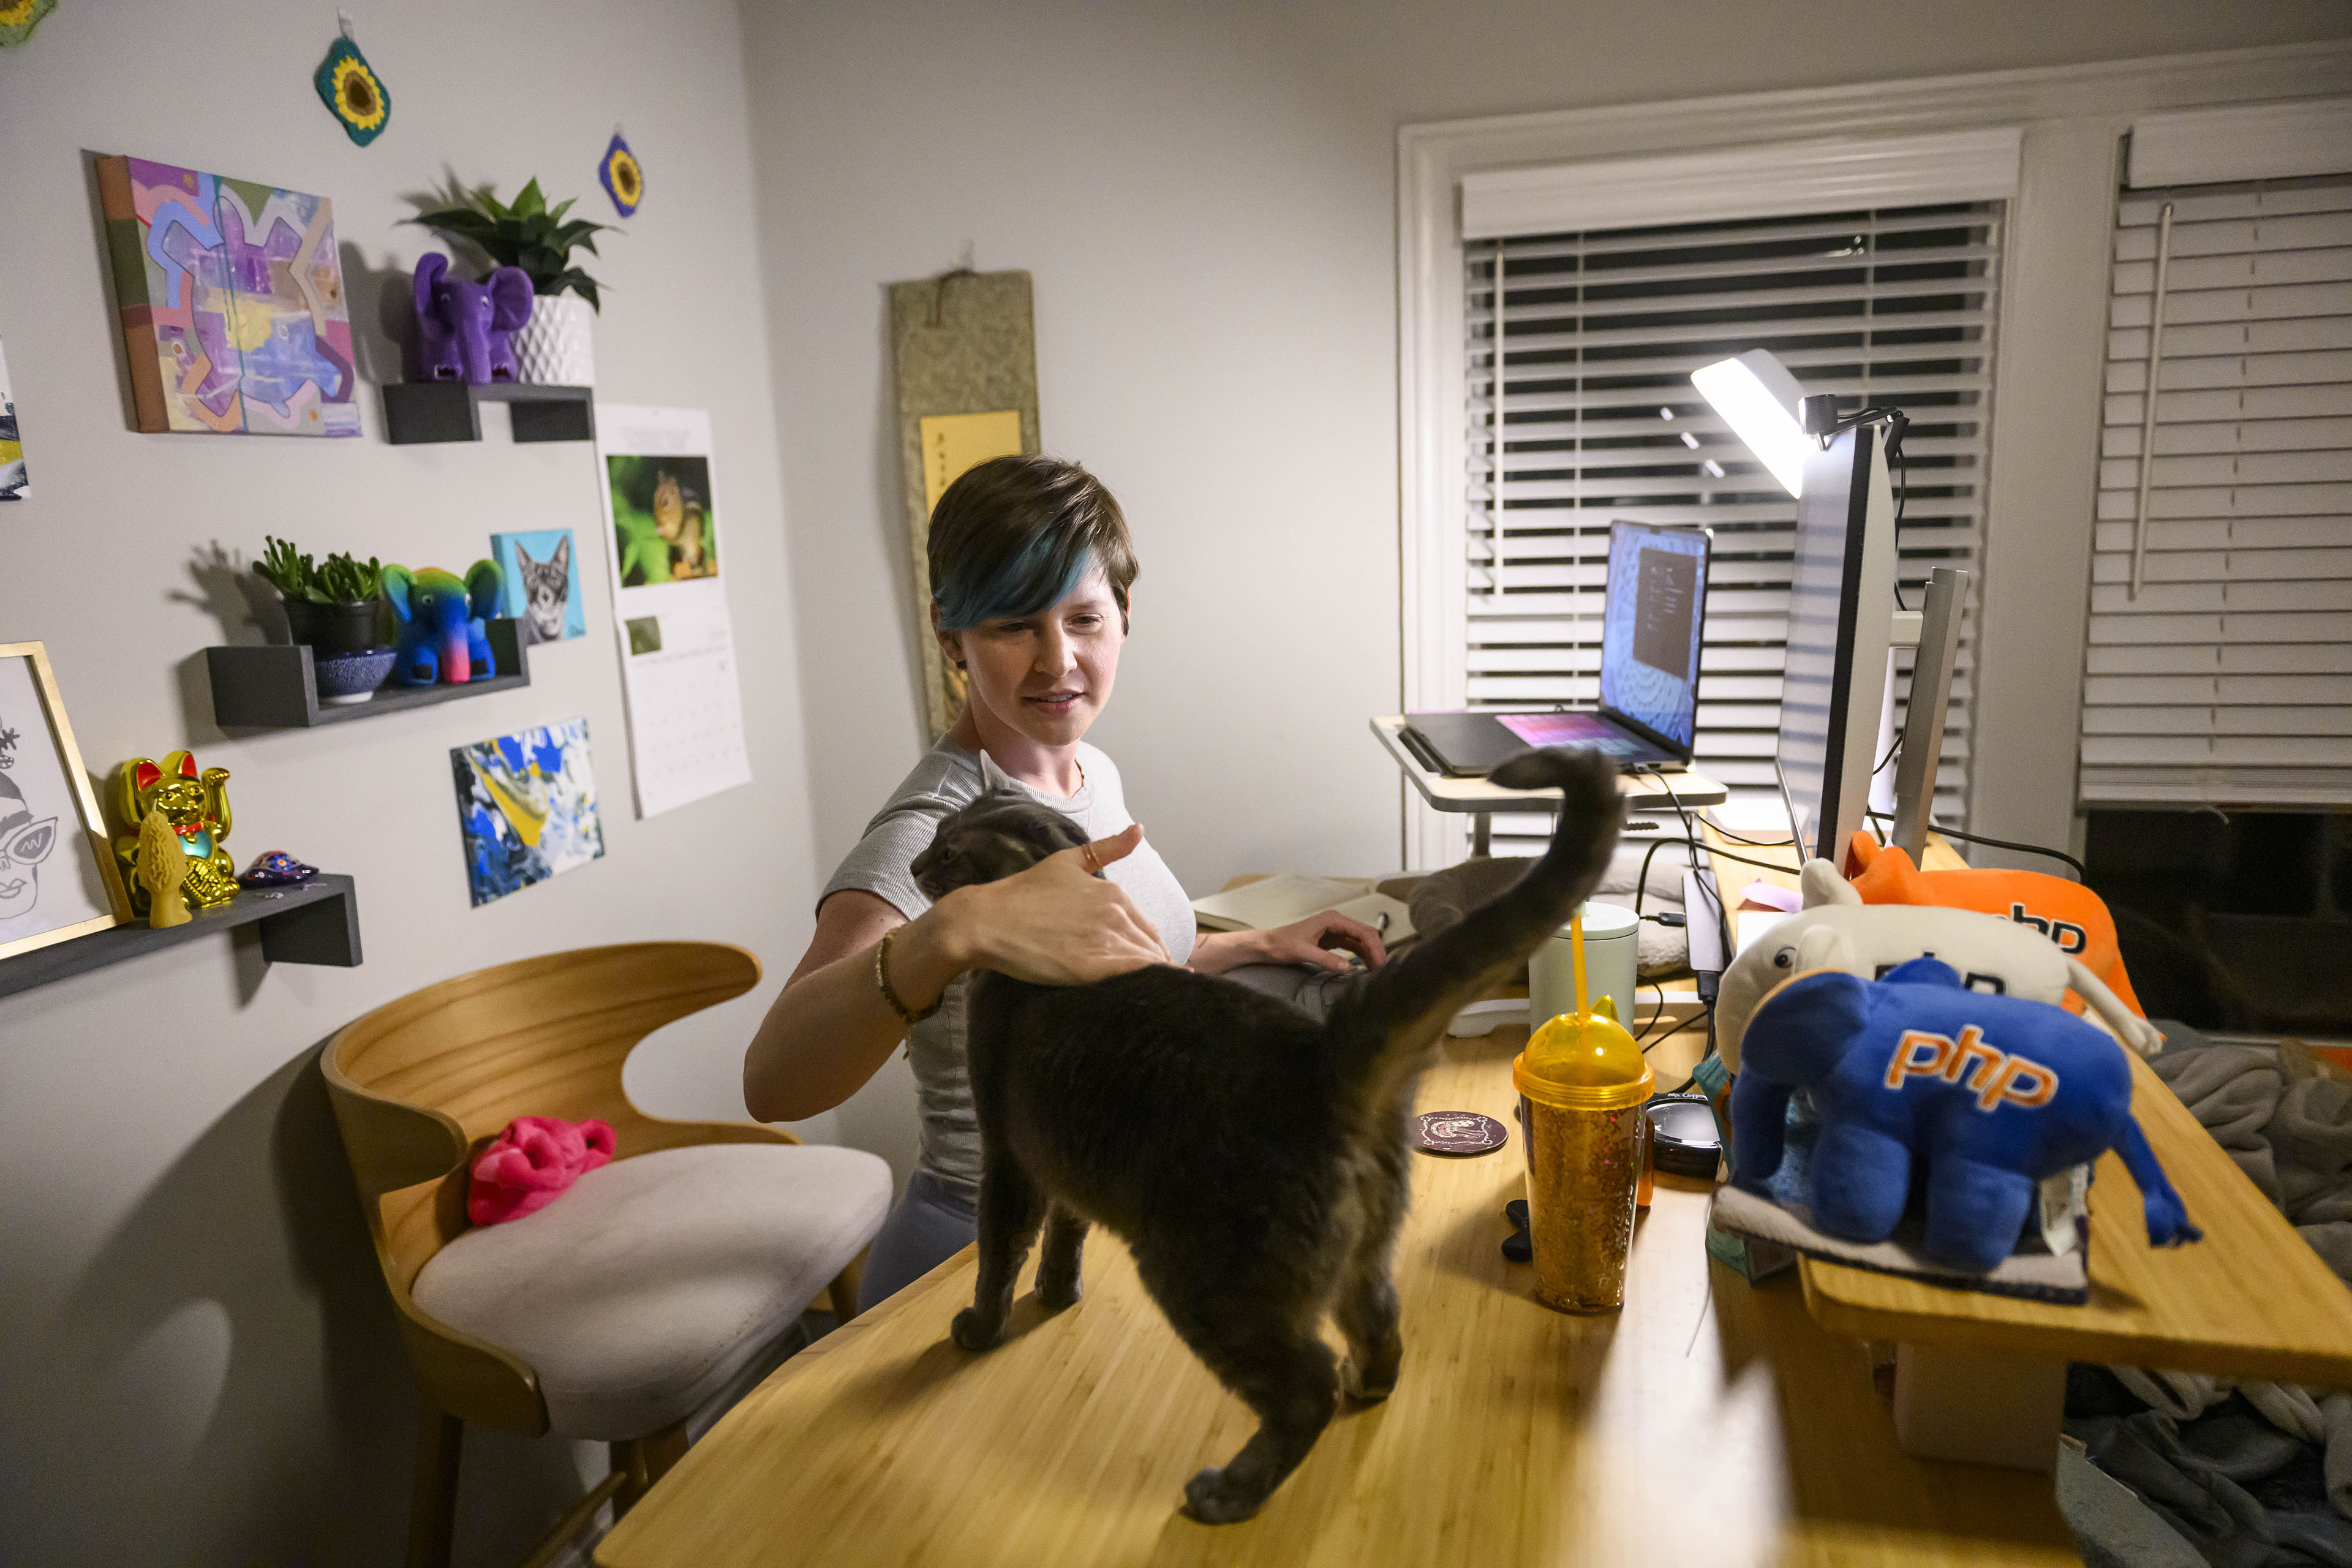 Cori Lint is pictured with her cat, Guppy, in her home office. The cat is standing on her desk as she pets its head.